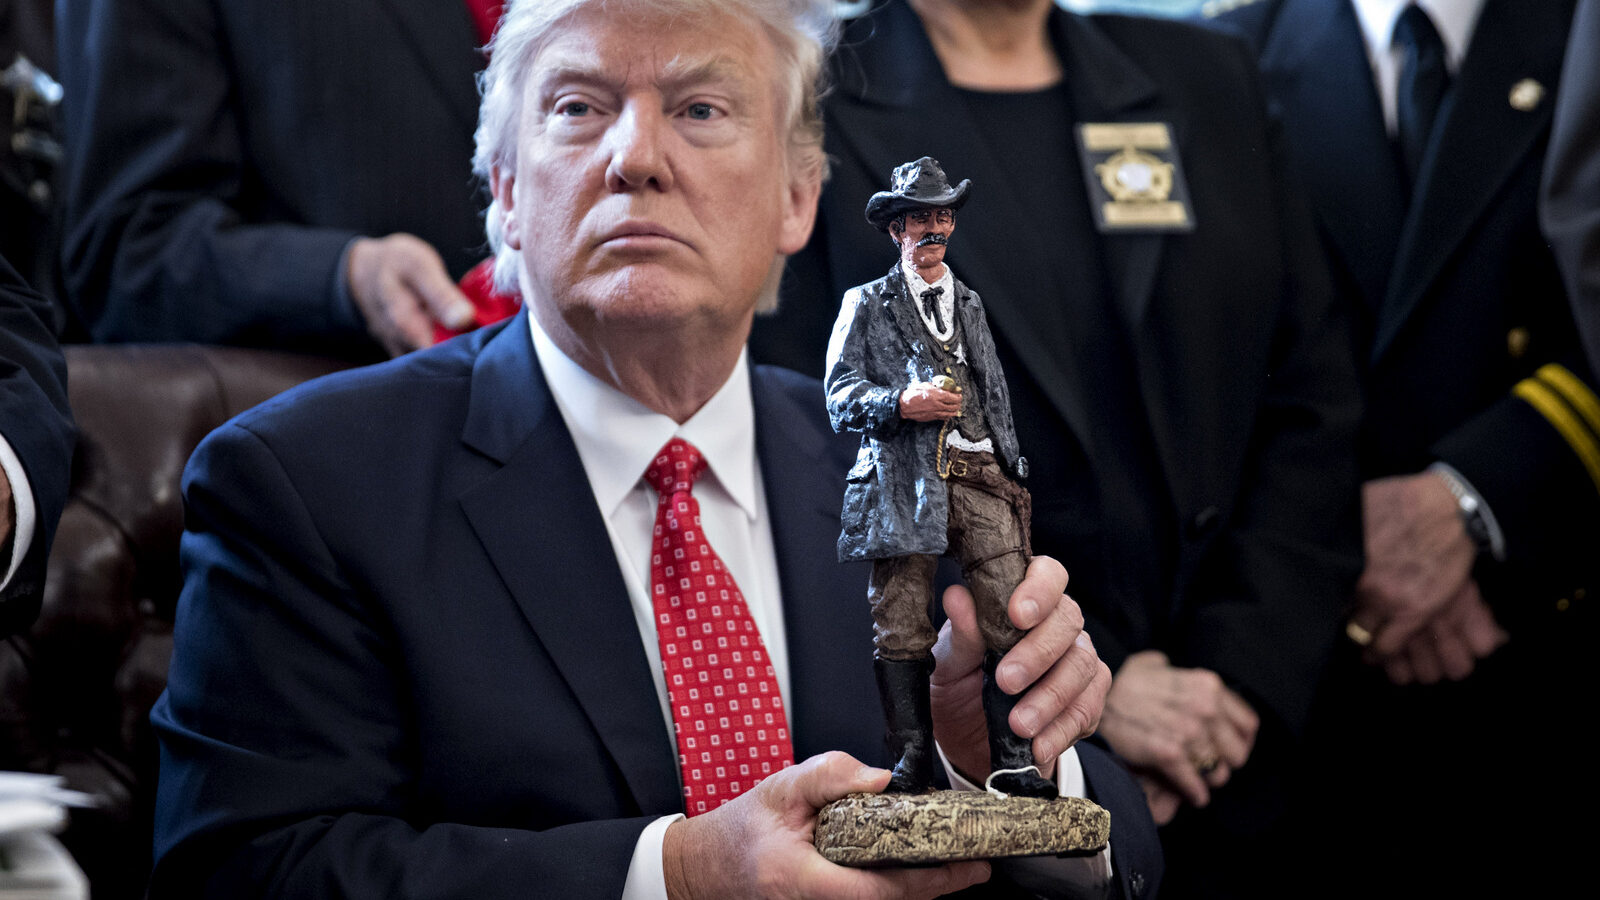 U.S. President Donald Trump holds up a statue he received as a gift while meeting with county sheriffs in the Oval Office of the White House in Washington, D.C., U.S., on Tuesday, Feb. 7, 2017. (Photo: Andrew Harrer/CNP/MediaPunch/IPX)